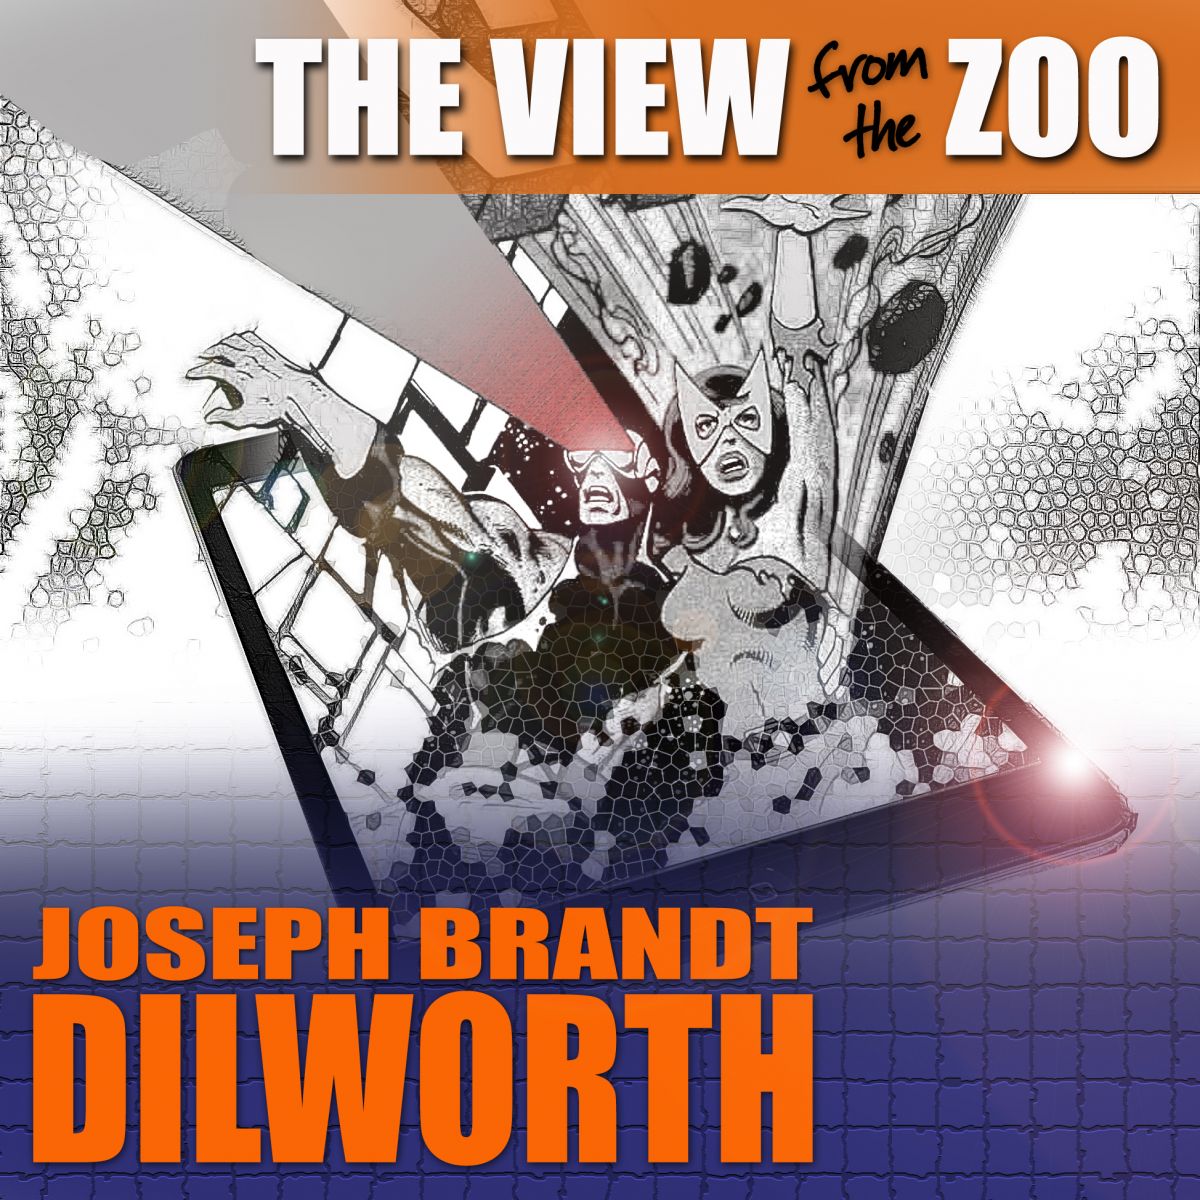 View from the Zoo - Love of Comics